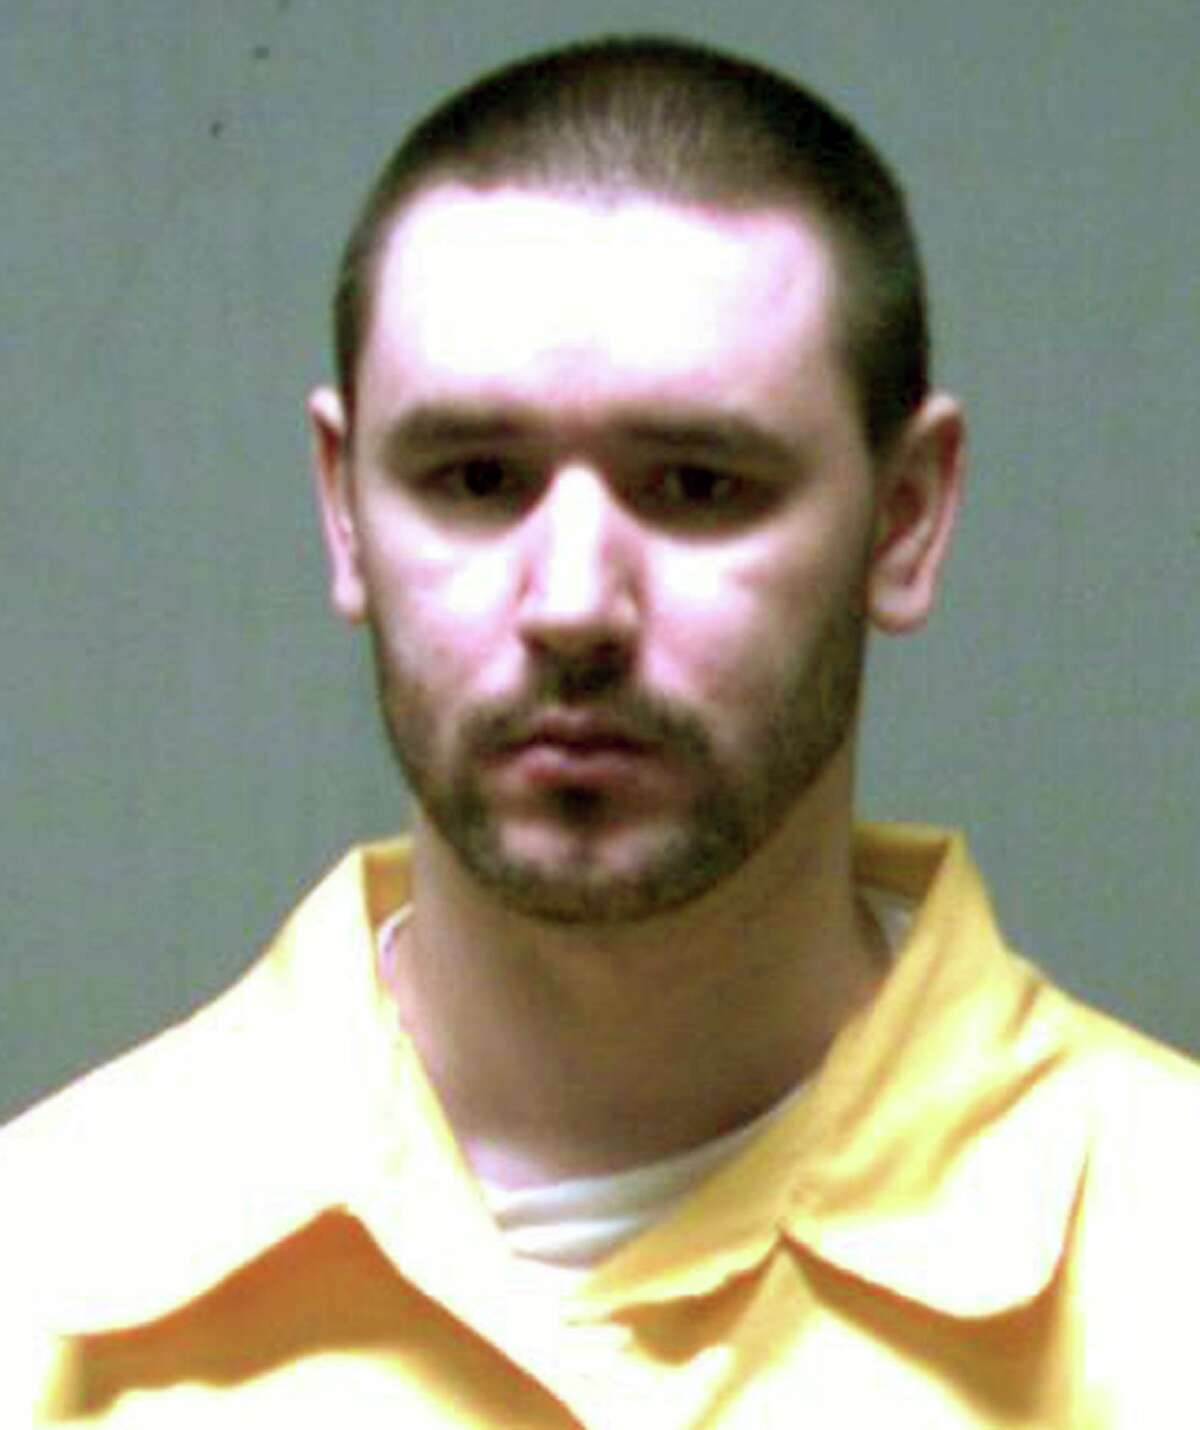 This undated inmate identification photo released Monday, Feb. 22, 2016, by the Connecticut Department of Correction shows Joshua Komisarjevsky, convicted of murder and other crimes during a 2007 home invasion in Cheshire, Conn. Killed were Jennifer Hawke-Petit and her two daughters, ages 11 and 17. Her husband William Petit was severely beaten but survived. Appellate lawyers for Komisarjevsky are expected to argue Tuesday, Feb. 23, 2016 in New Haven Superior Court that his trial lawyers weren’t provided with police phone call recordings crucial to the defense. (Connecticut Department of Correction via AP)